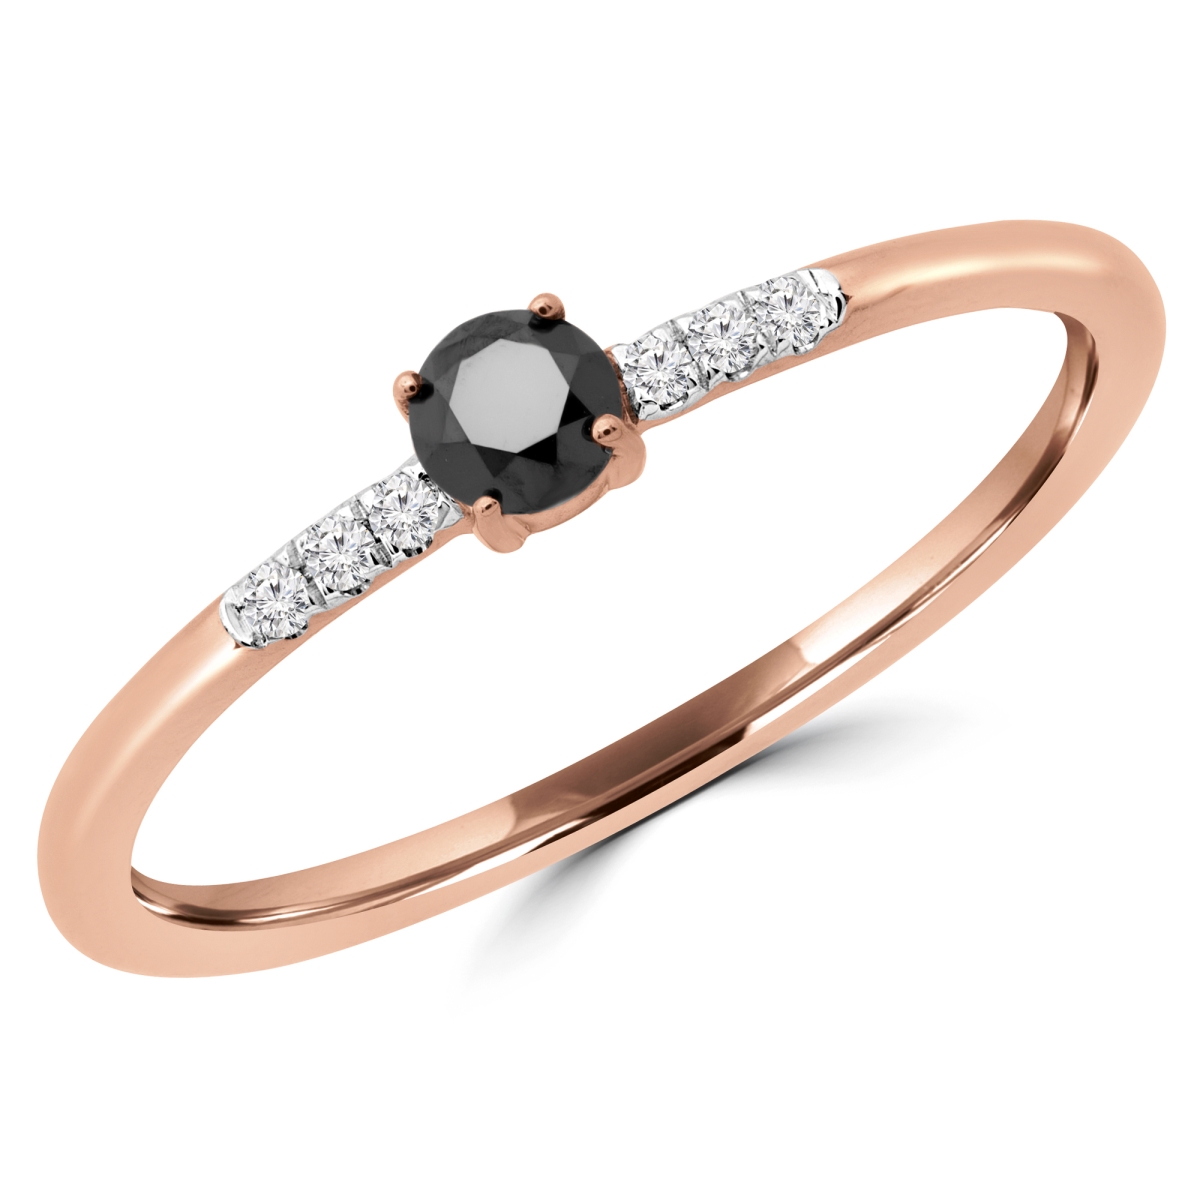 Picture of Majesty Diamonds MDR190079-5 0.16 CTW Round Black Diamond Bezel Set Cocktail Ring in 14K Rose Gold - Size 5